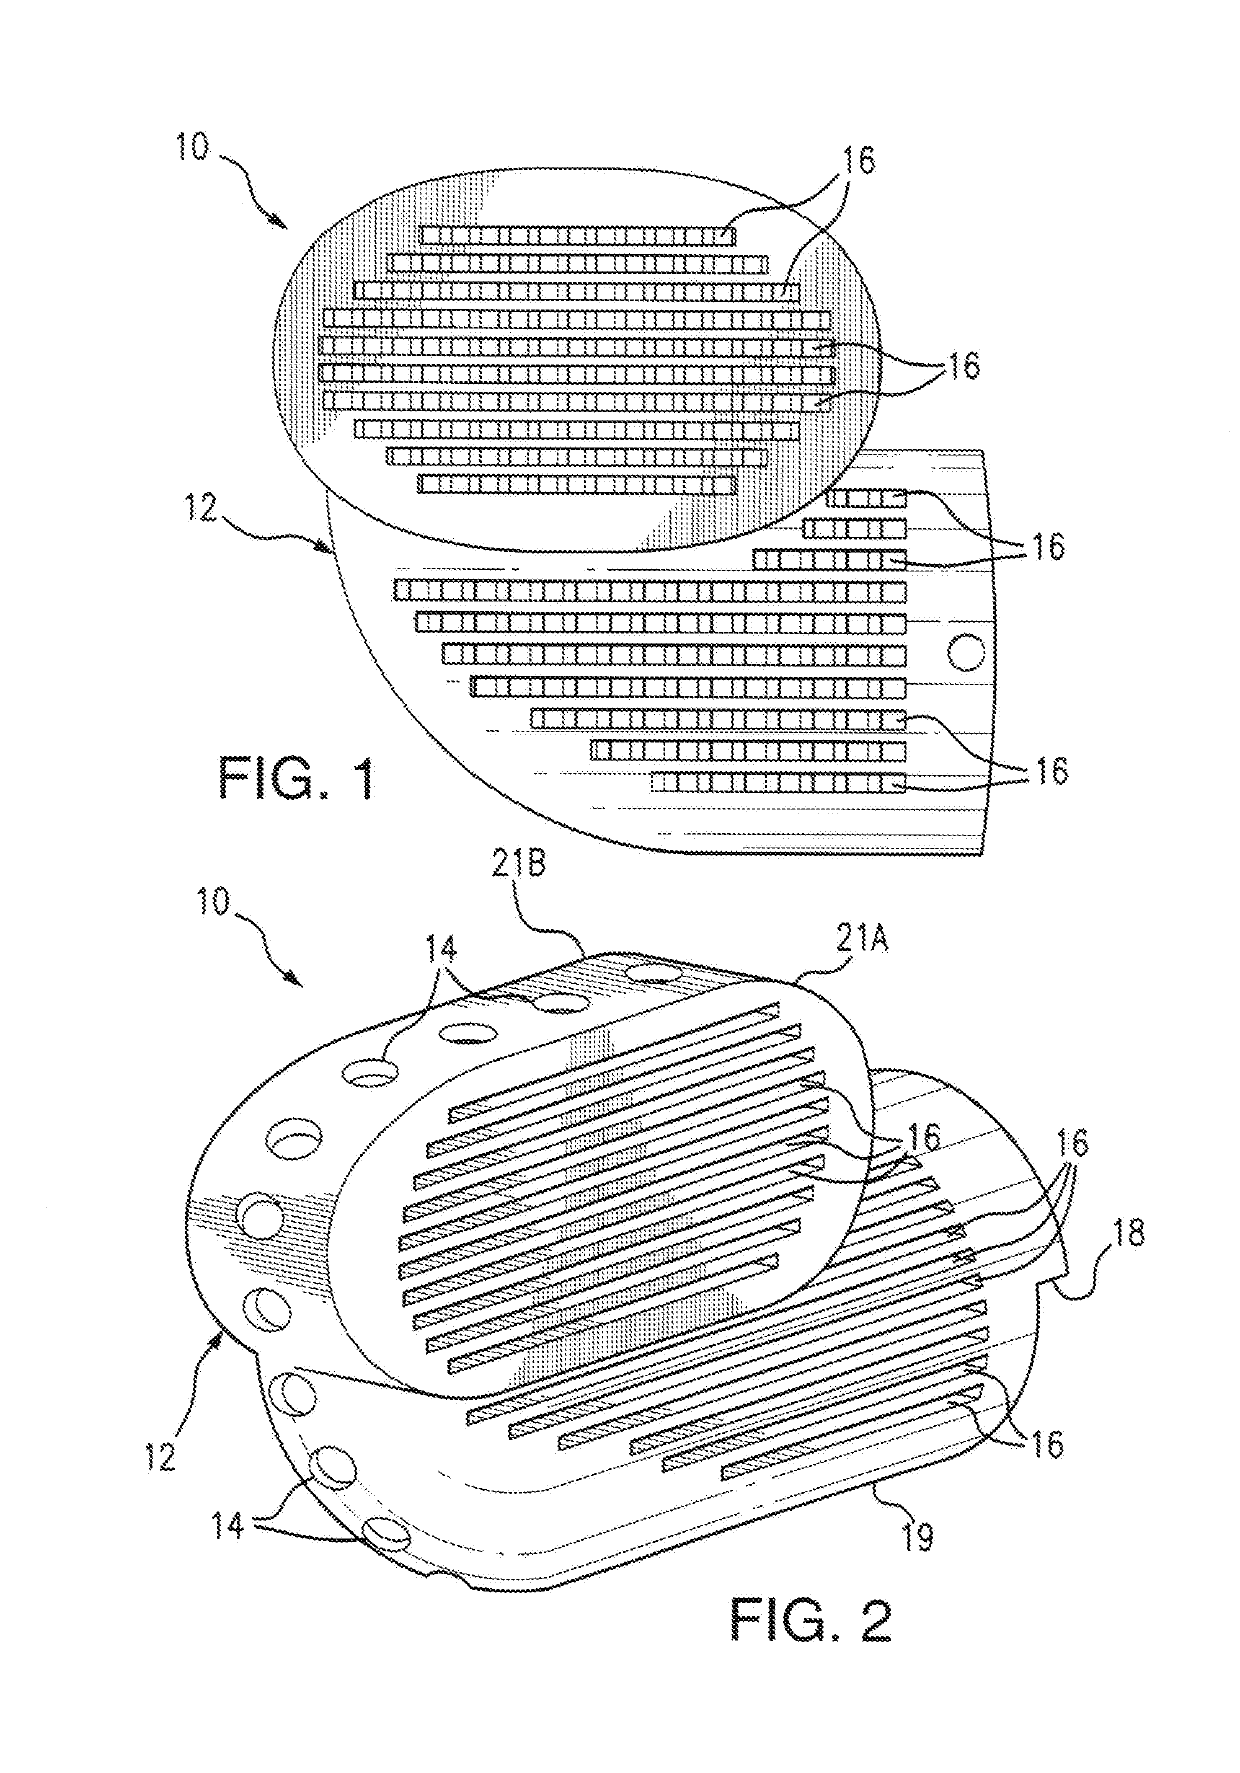 Safety and fluid flow enhancement device for fluid transfer systems